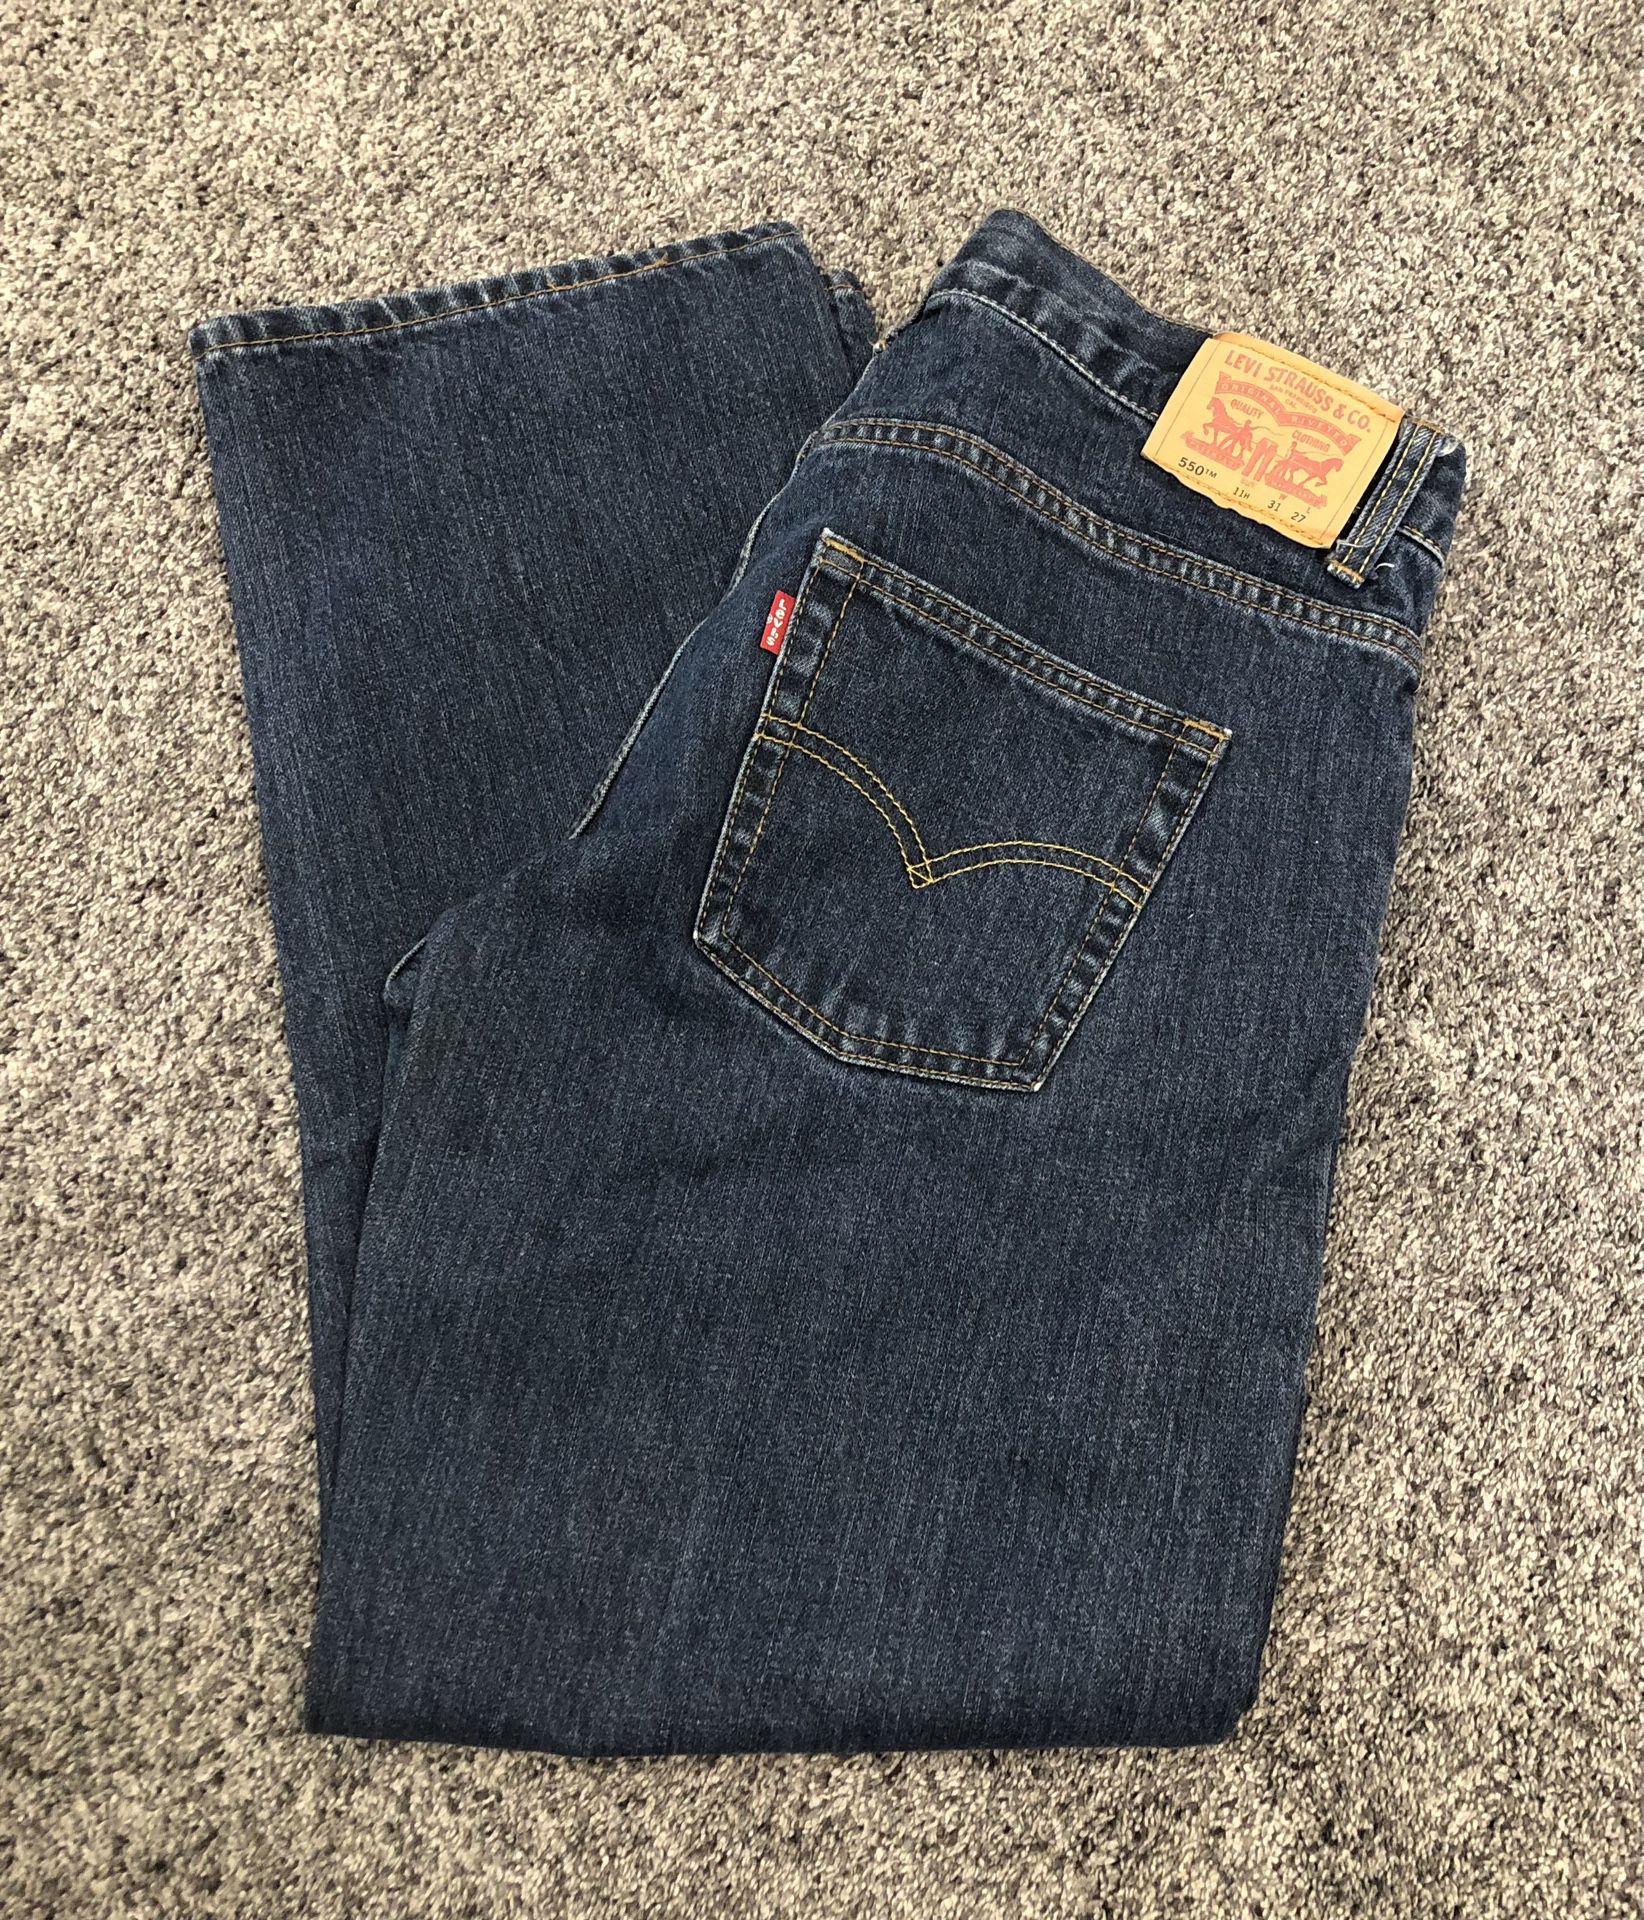 Youth Levi's 550 Relaxed Jeans SZ 11 Husky W31 L27 Straight Leg